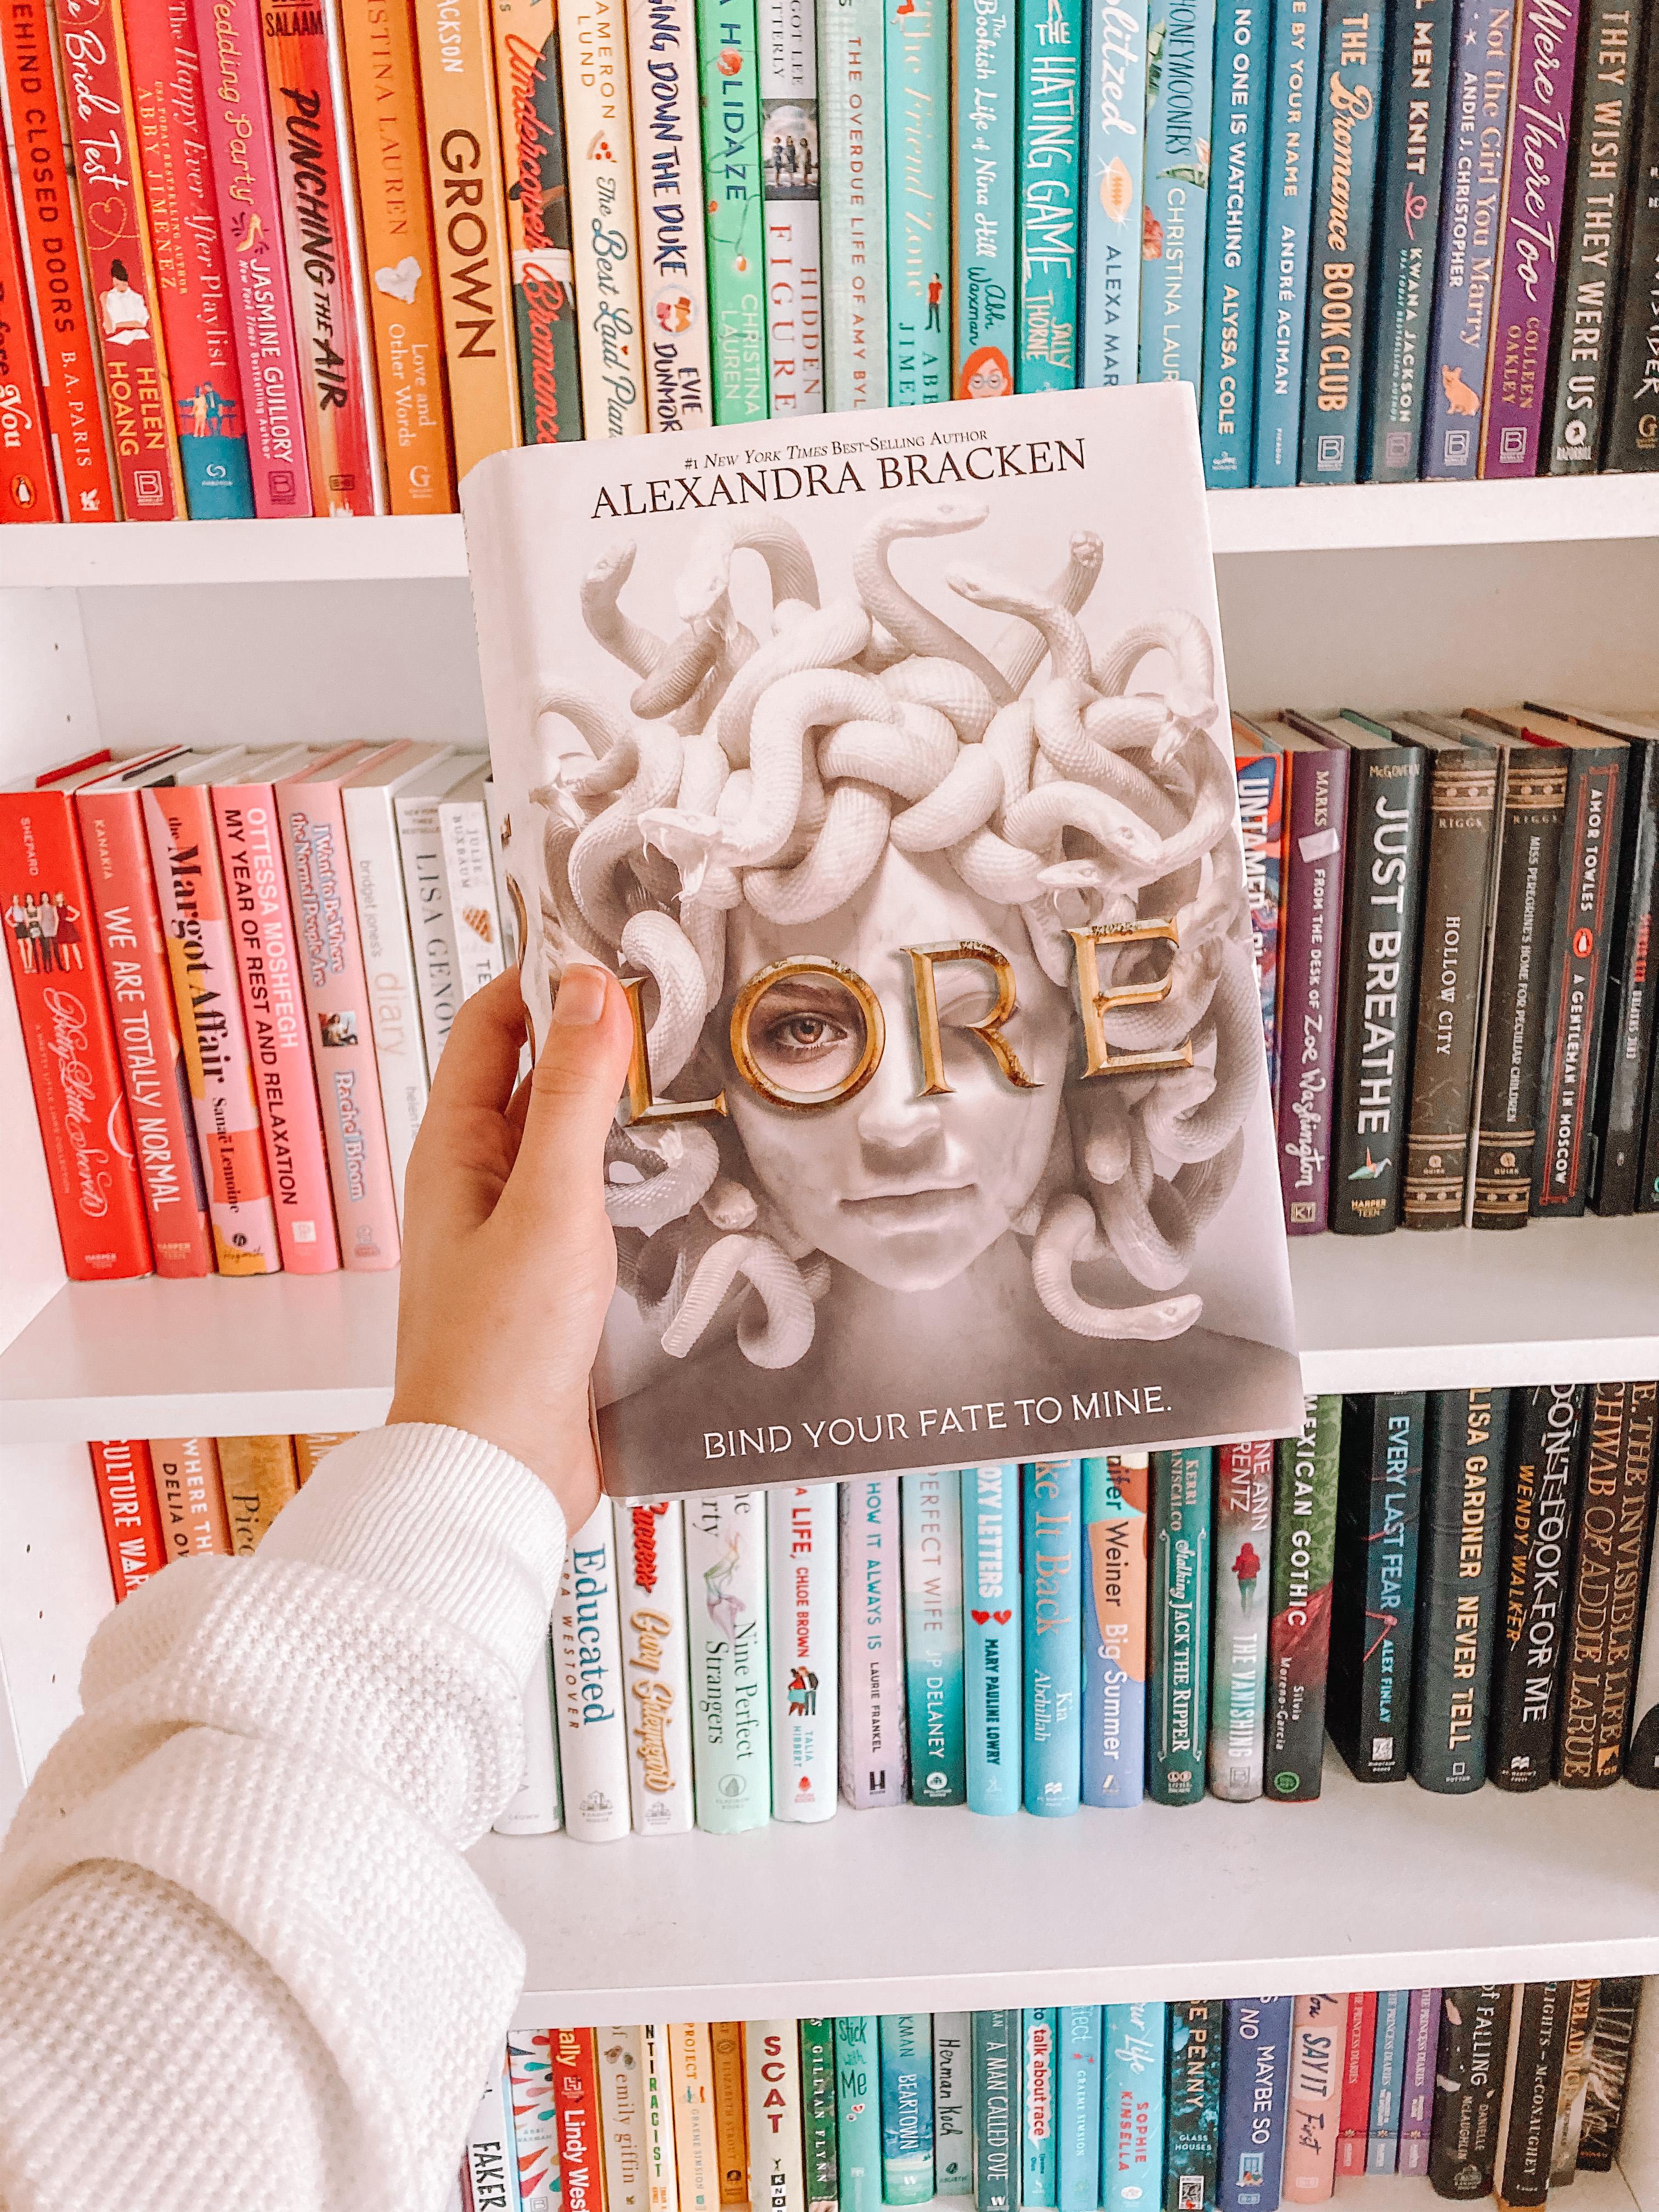 Book blogger holds a finished copy of Lore by Alexandra Bracken, a young adult fantasy novel, showing a Lore book review.